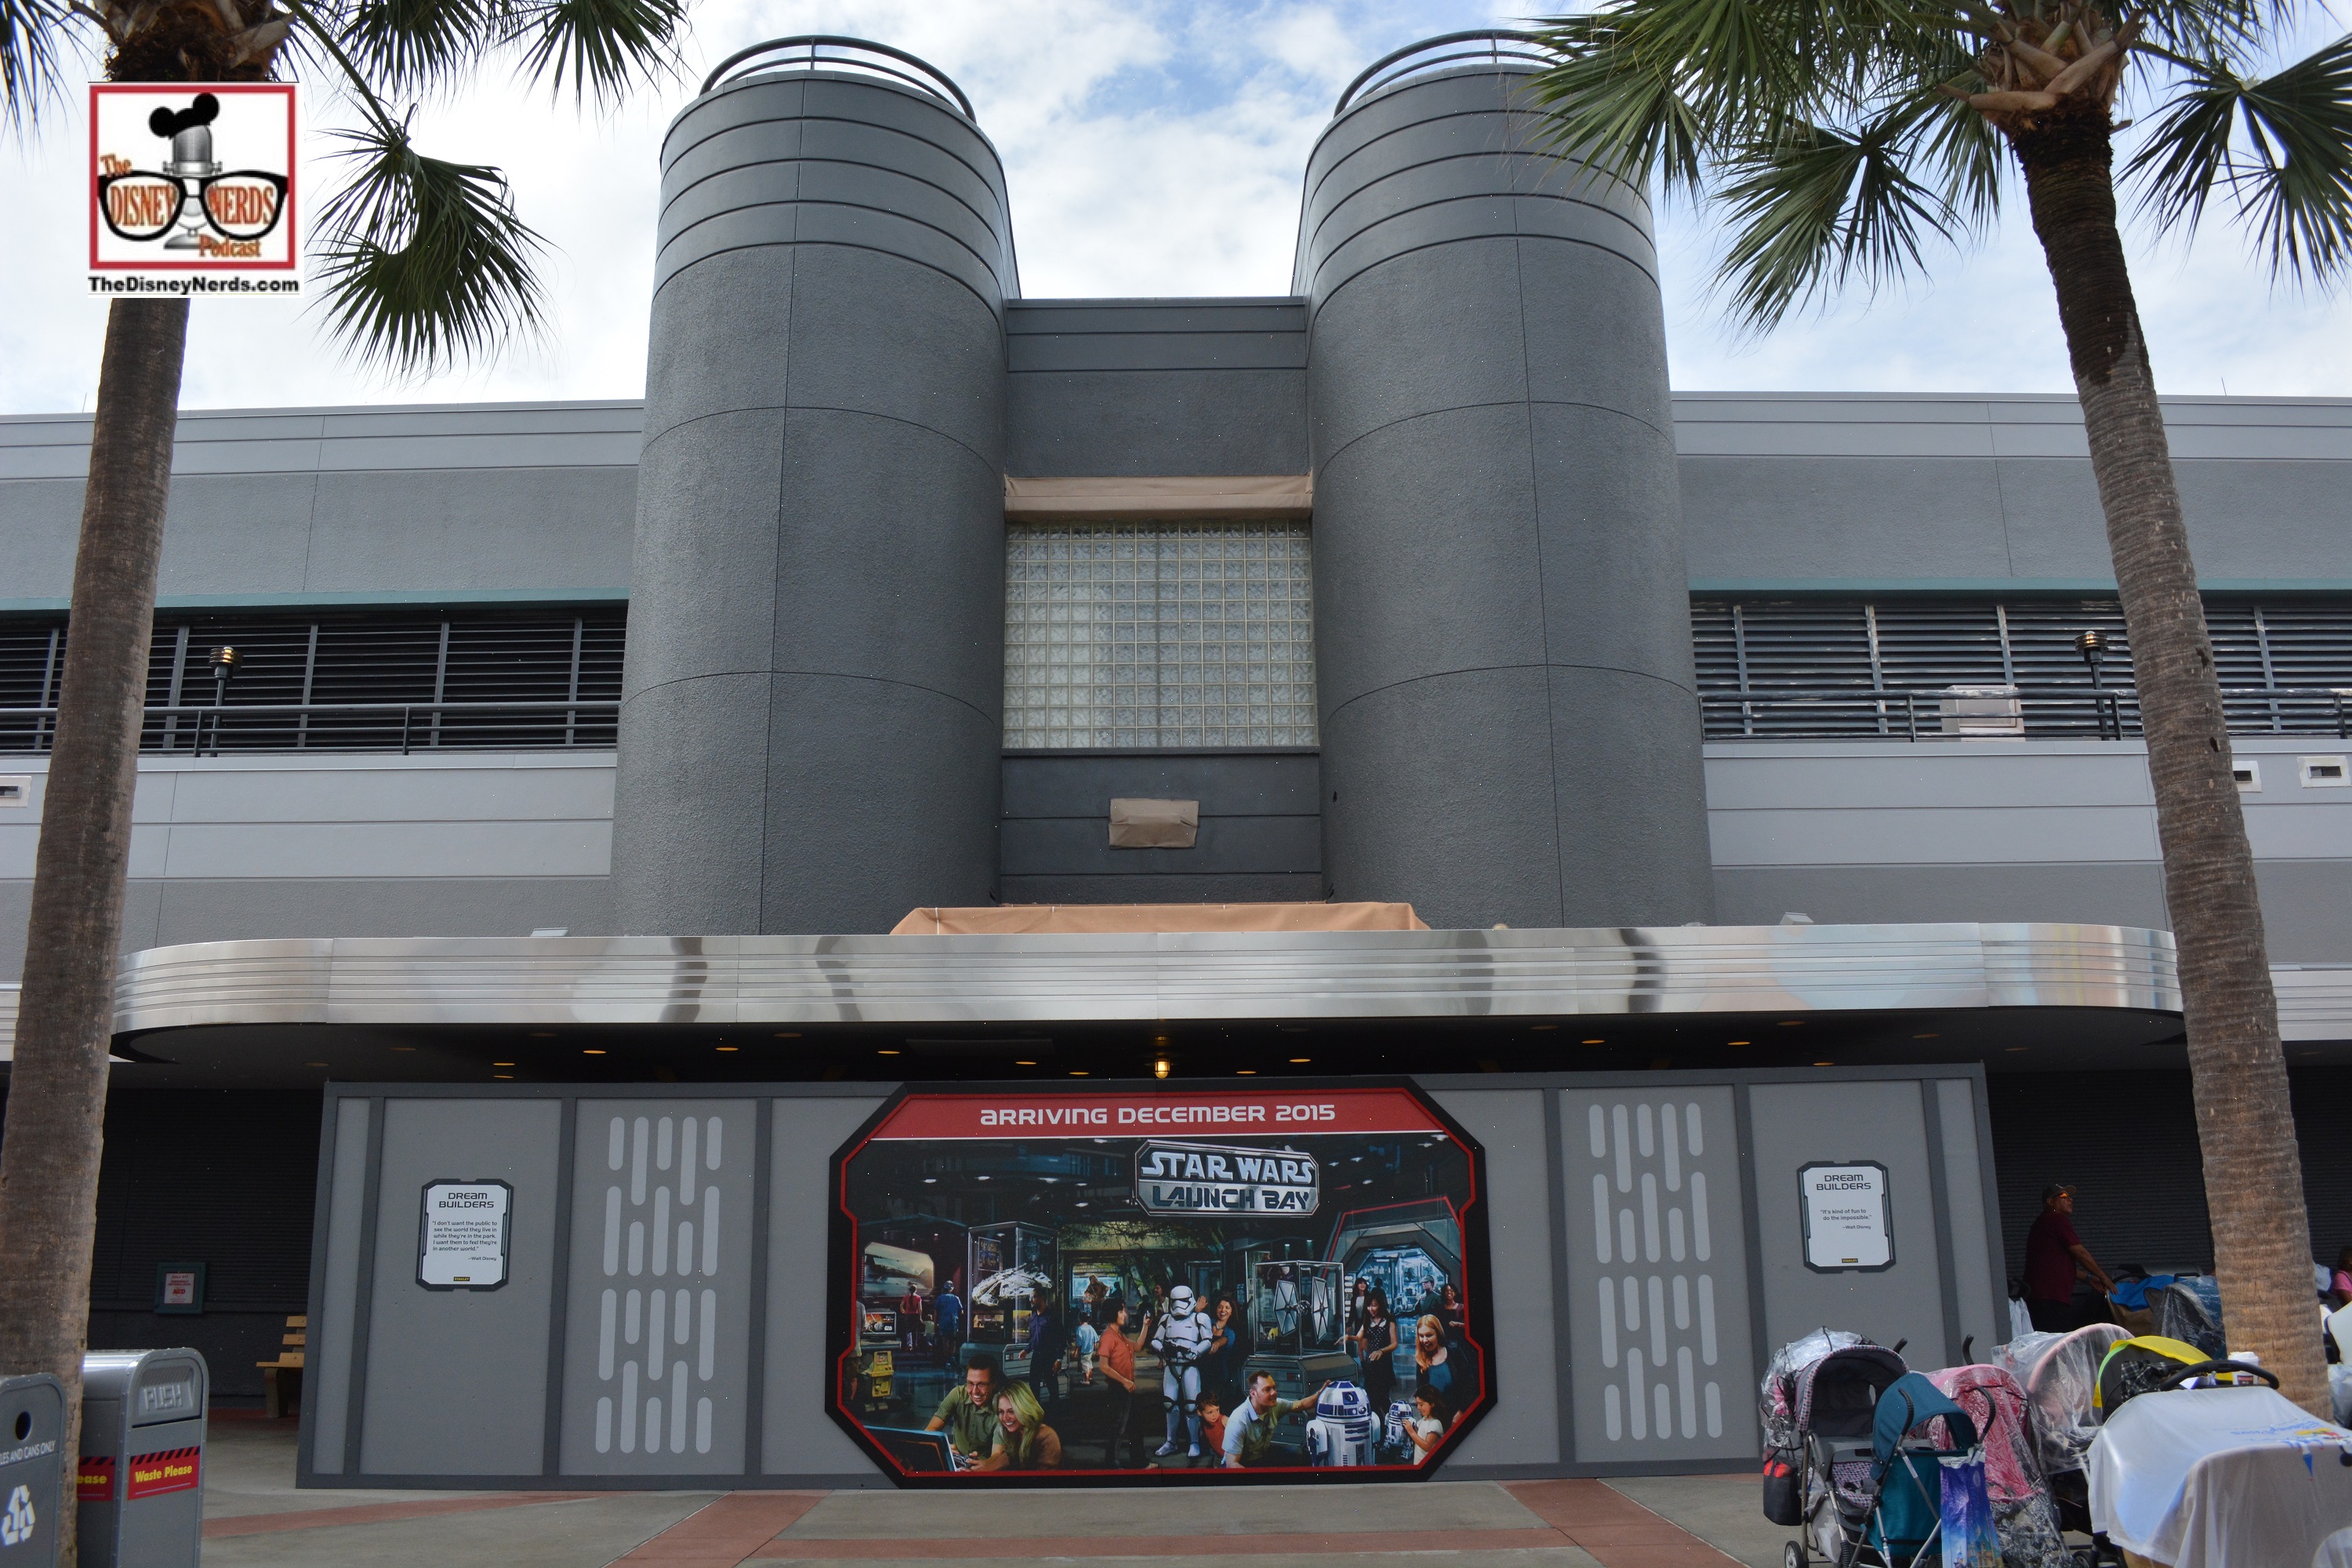 The Animation Building... Soon to be "Star Wars" Launch Bay..